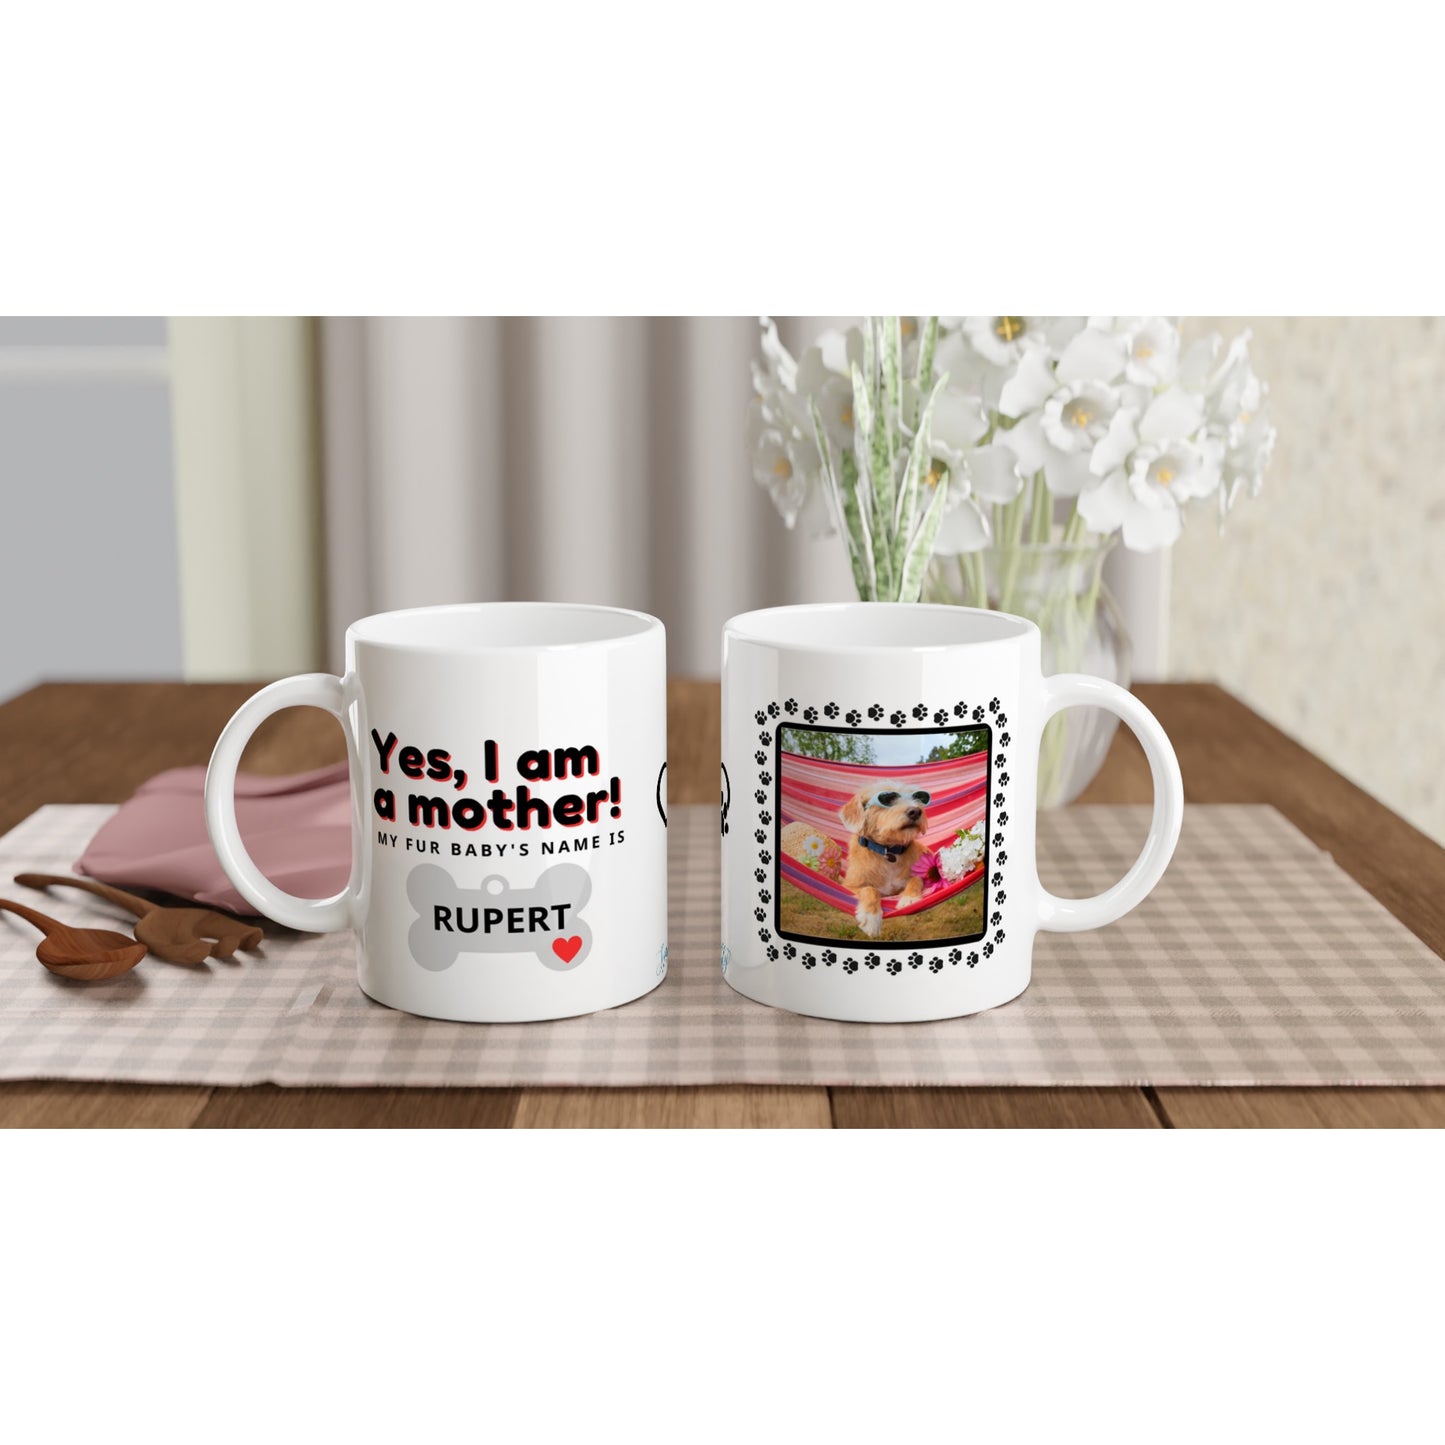 "Yes, I am a mother. My fur baby's name is..." Customizable Photo & Name Mug front and back view sitting on table